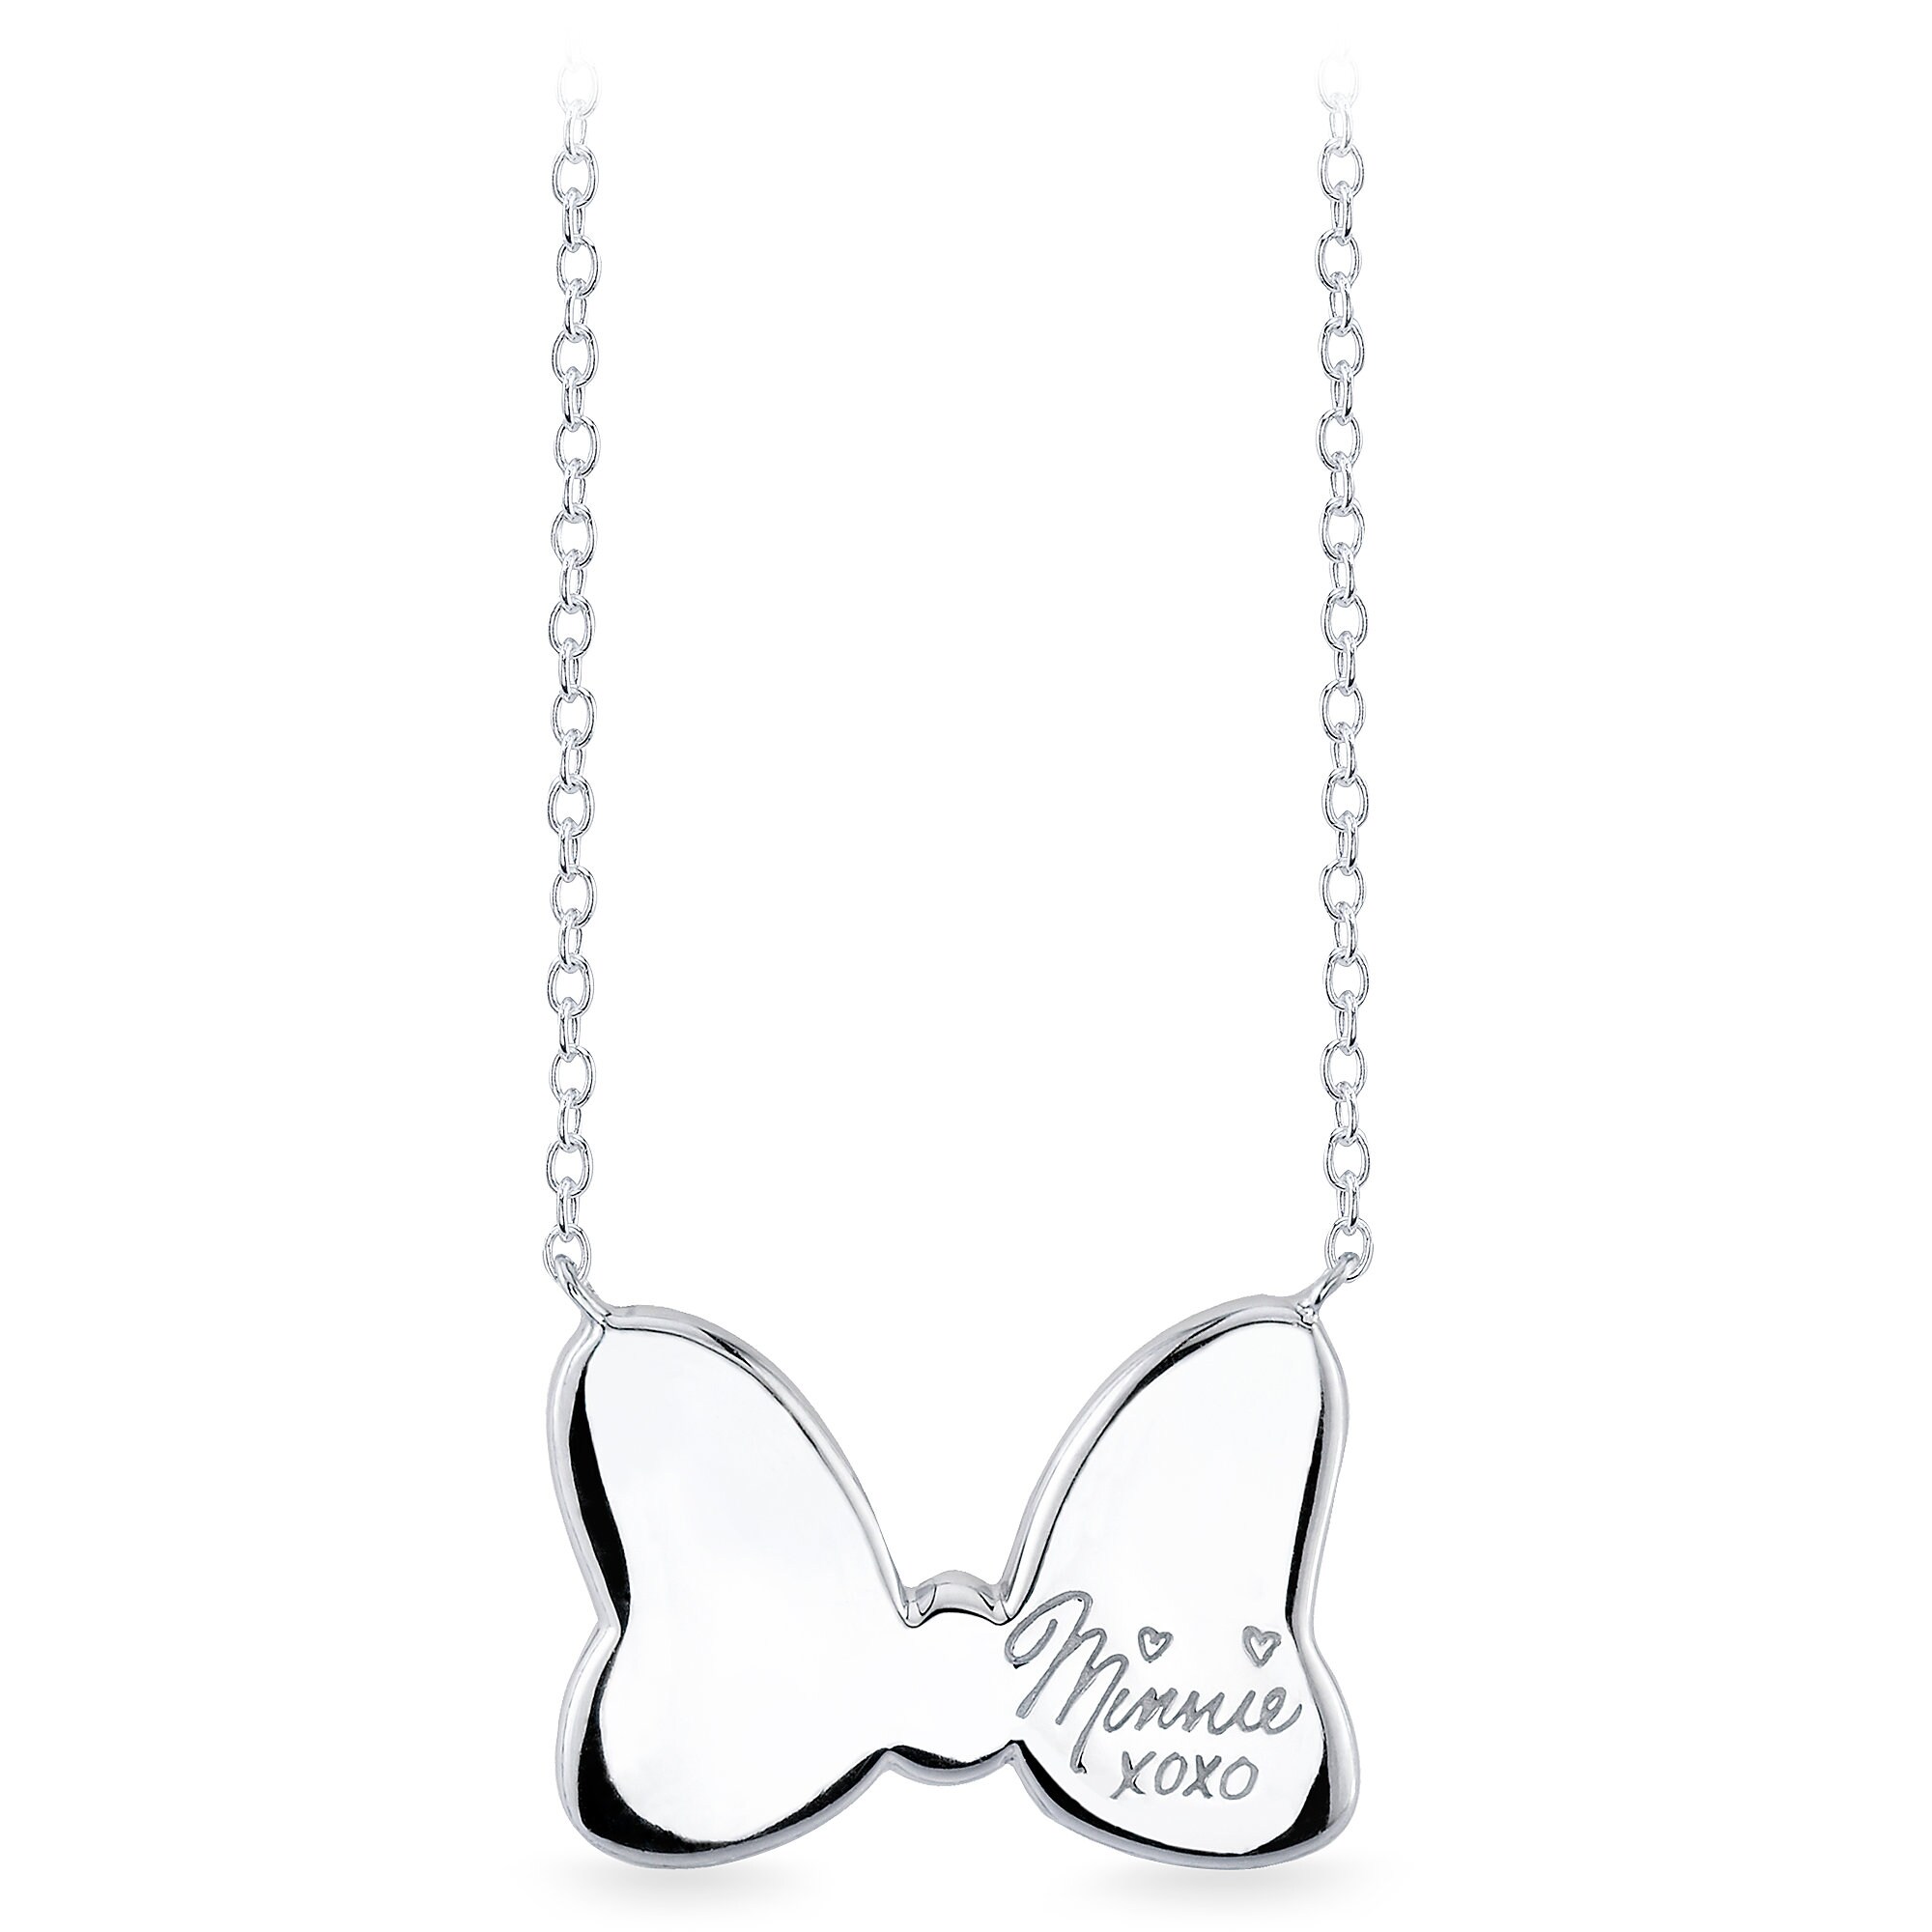 Minnie Mouse Red Bow Sterling Silver Necklace by RockLove